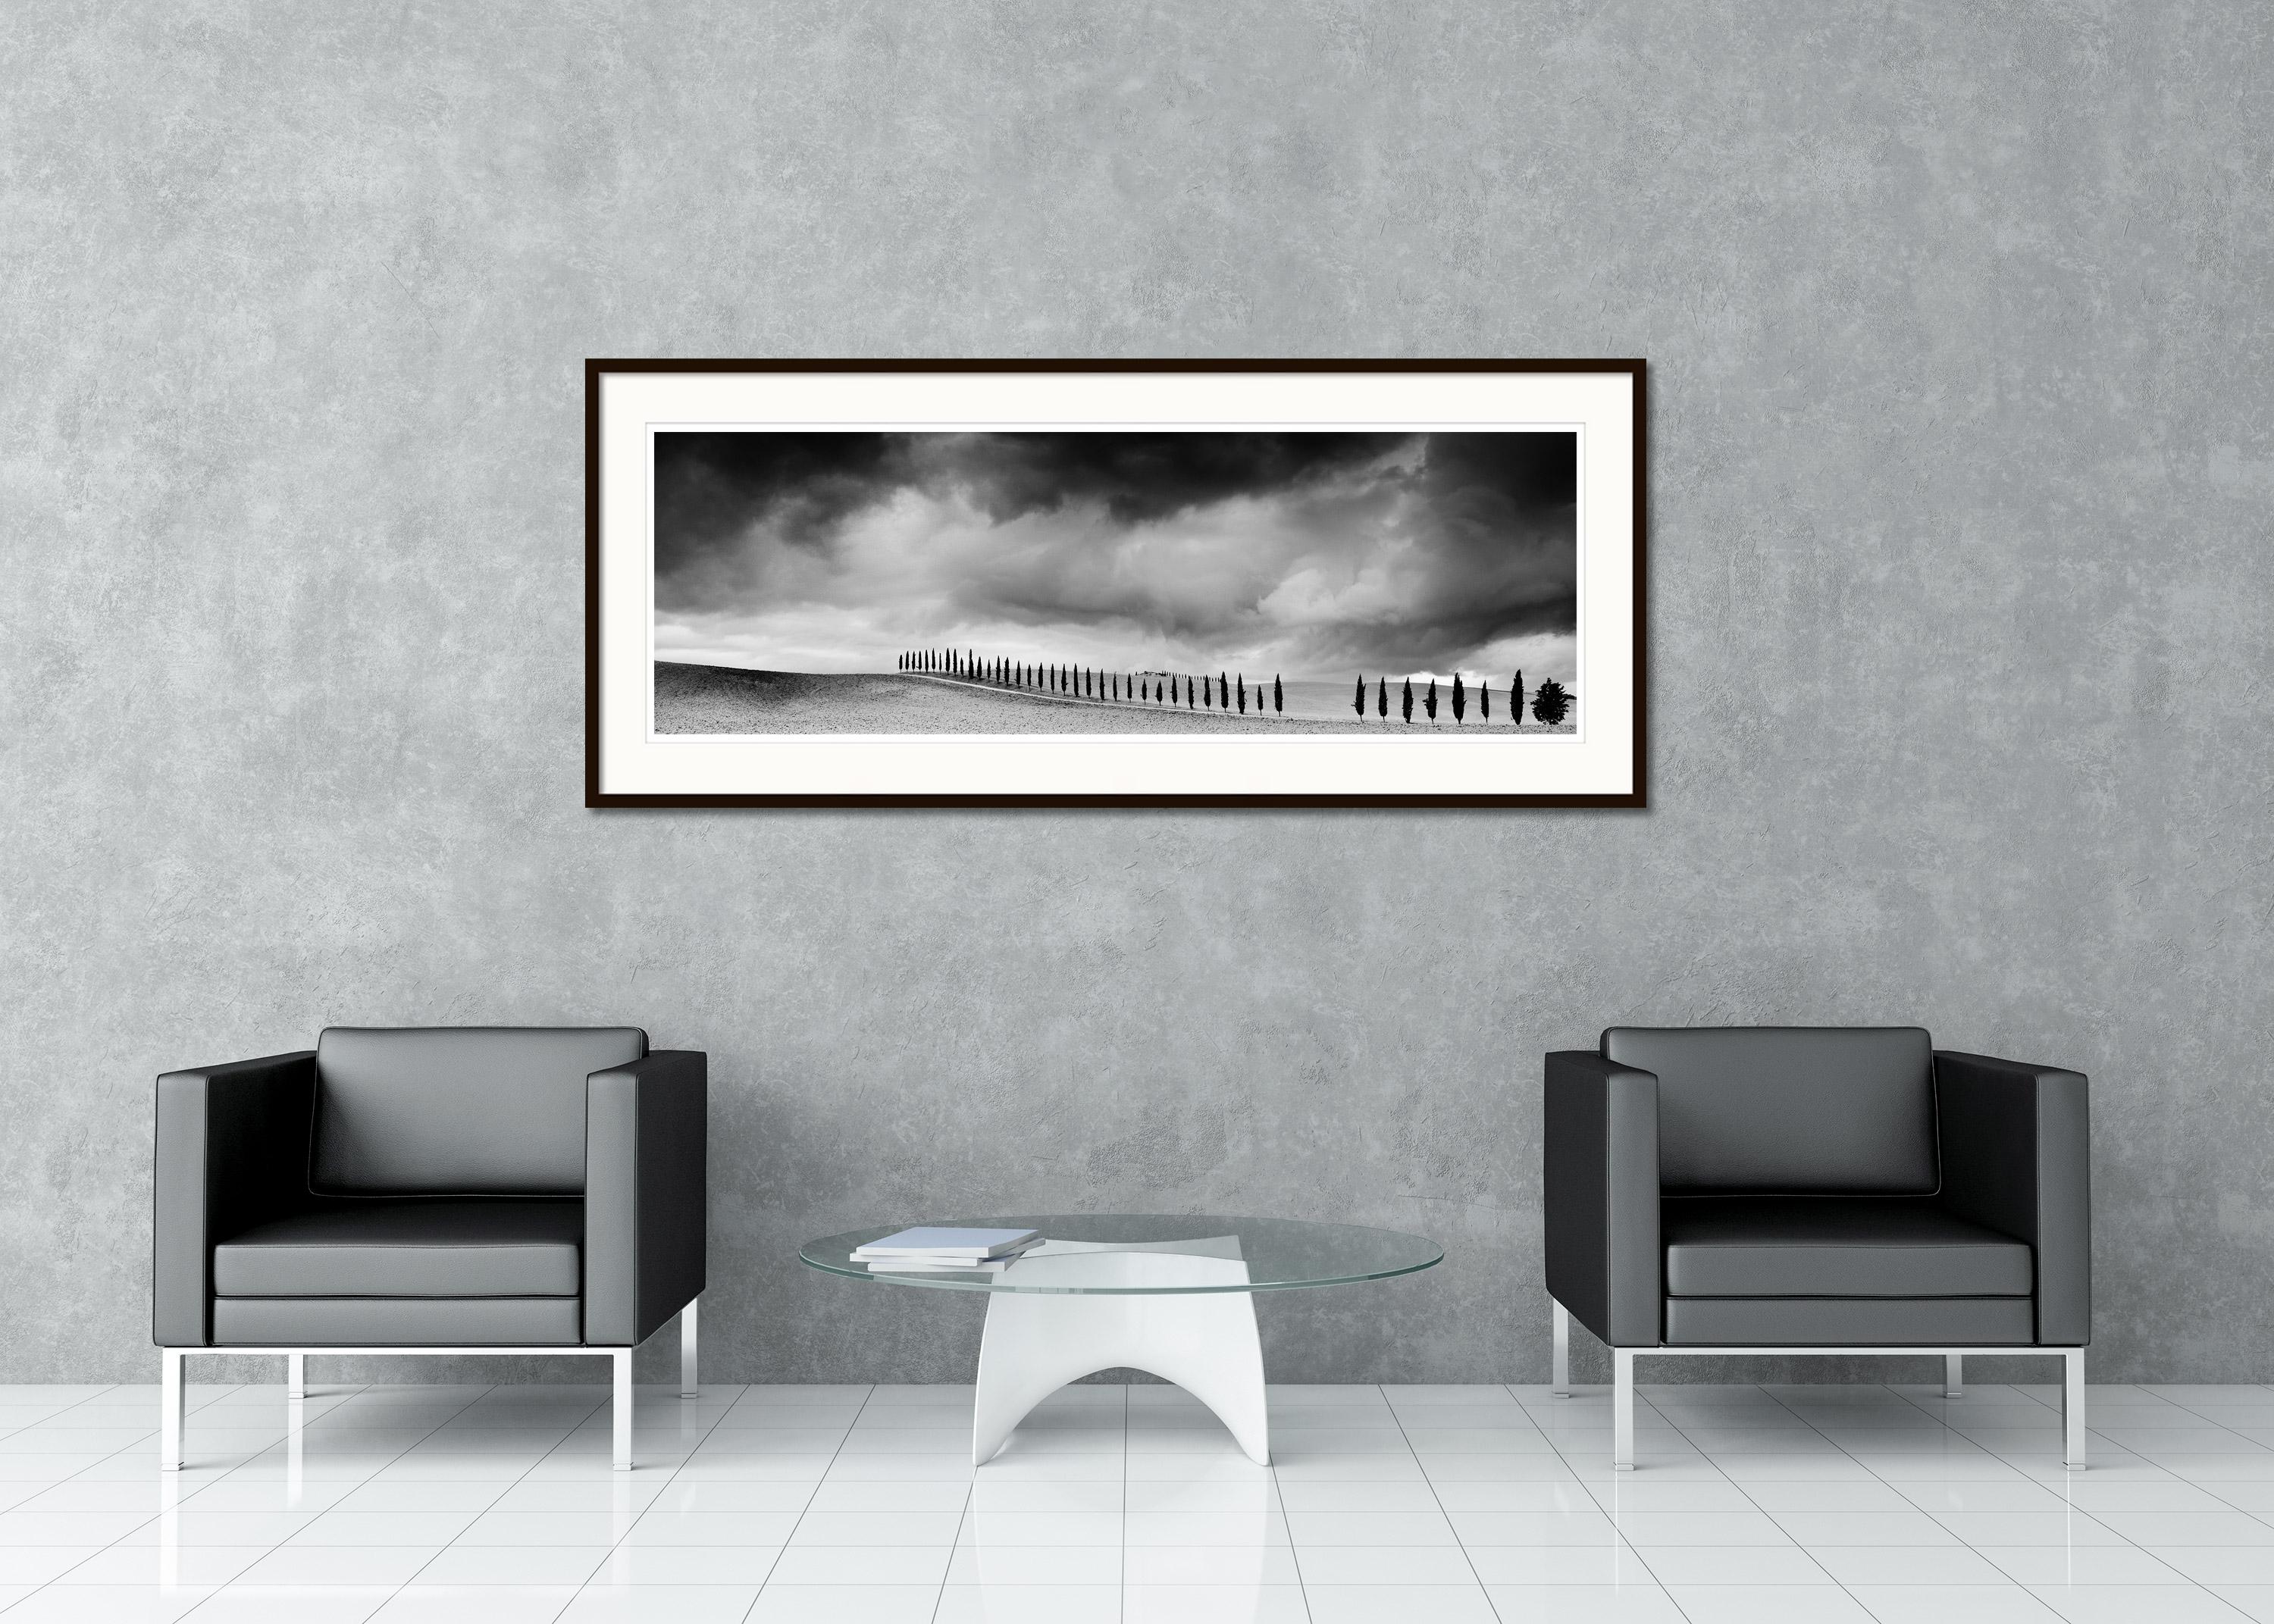 Black and white fine art panorama landscape photography print. Cypress tree avenue on hill with heavy clouds, Tuscany, Italy. Archival pigment ink print, edition of 9. Signed, titled, dated and numbered by artist. Certificate of authenticity